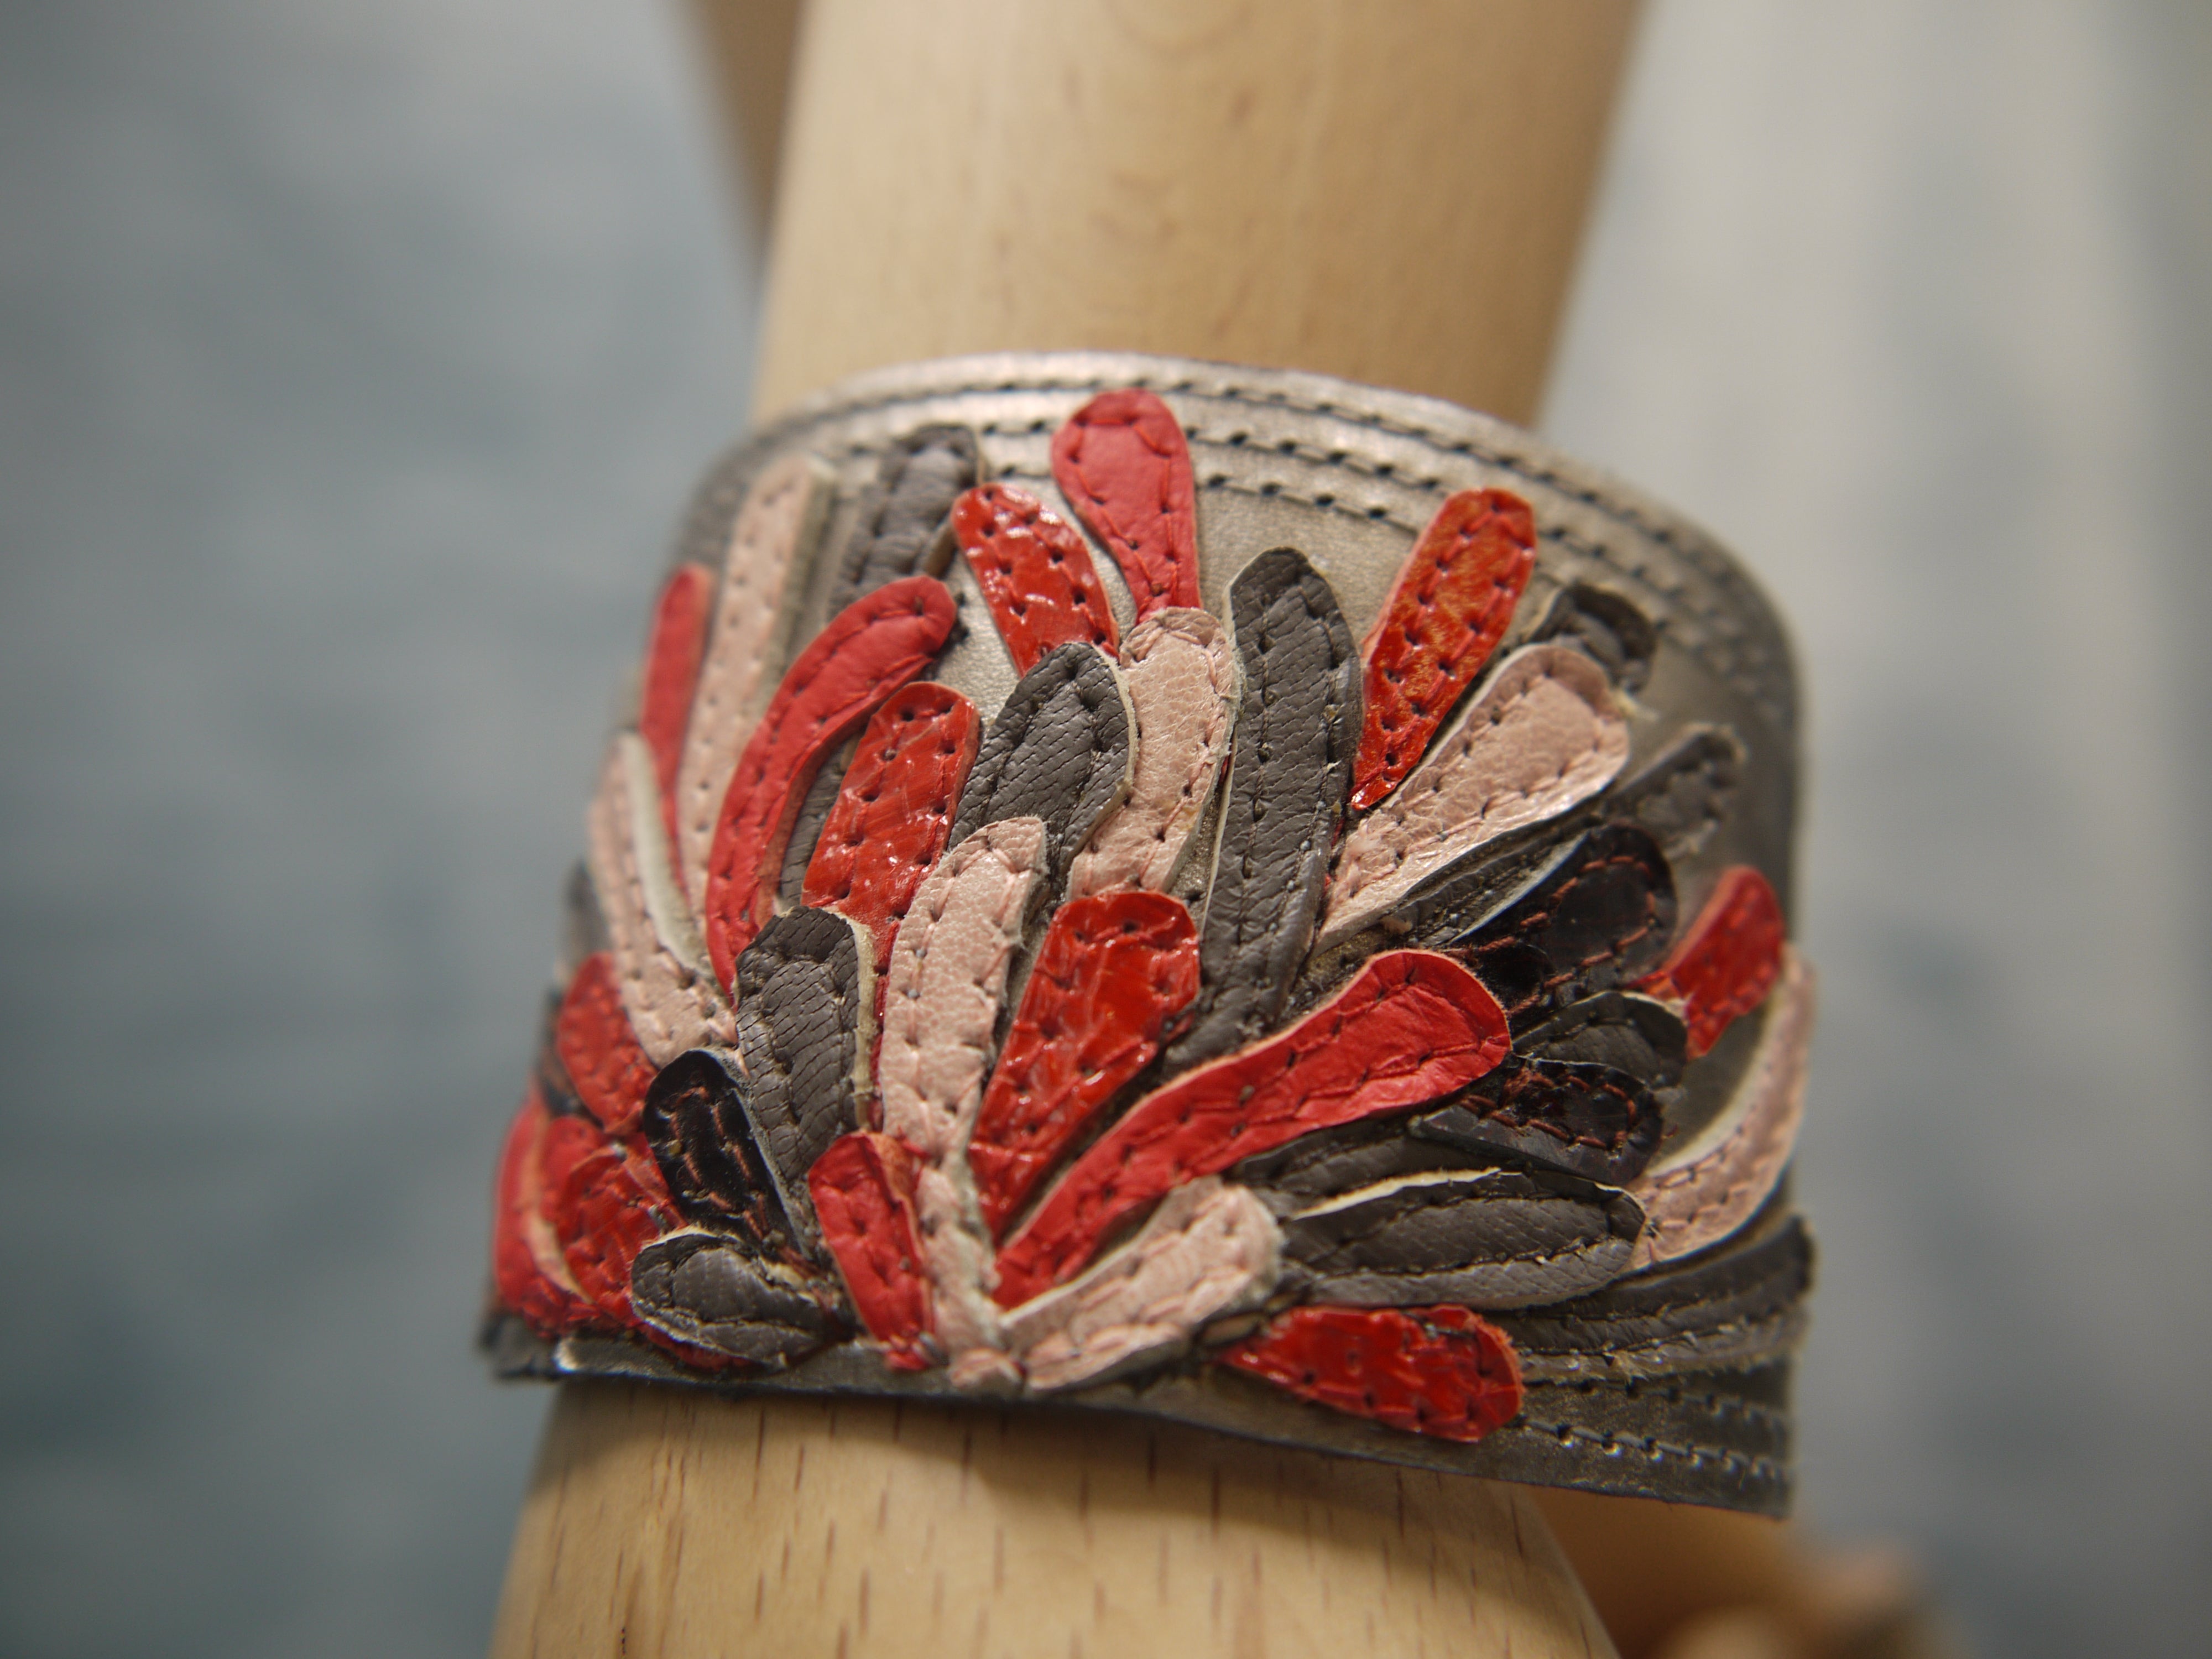 Chysanthemum Leather Cuff with hand-cut petals in vermilion, brown and pale pink, one-of-a- kind, unique, made in Italy by designer-makers